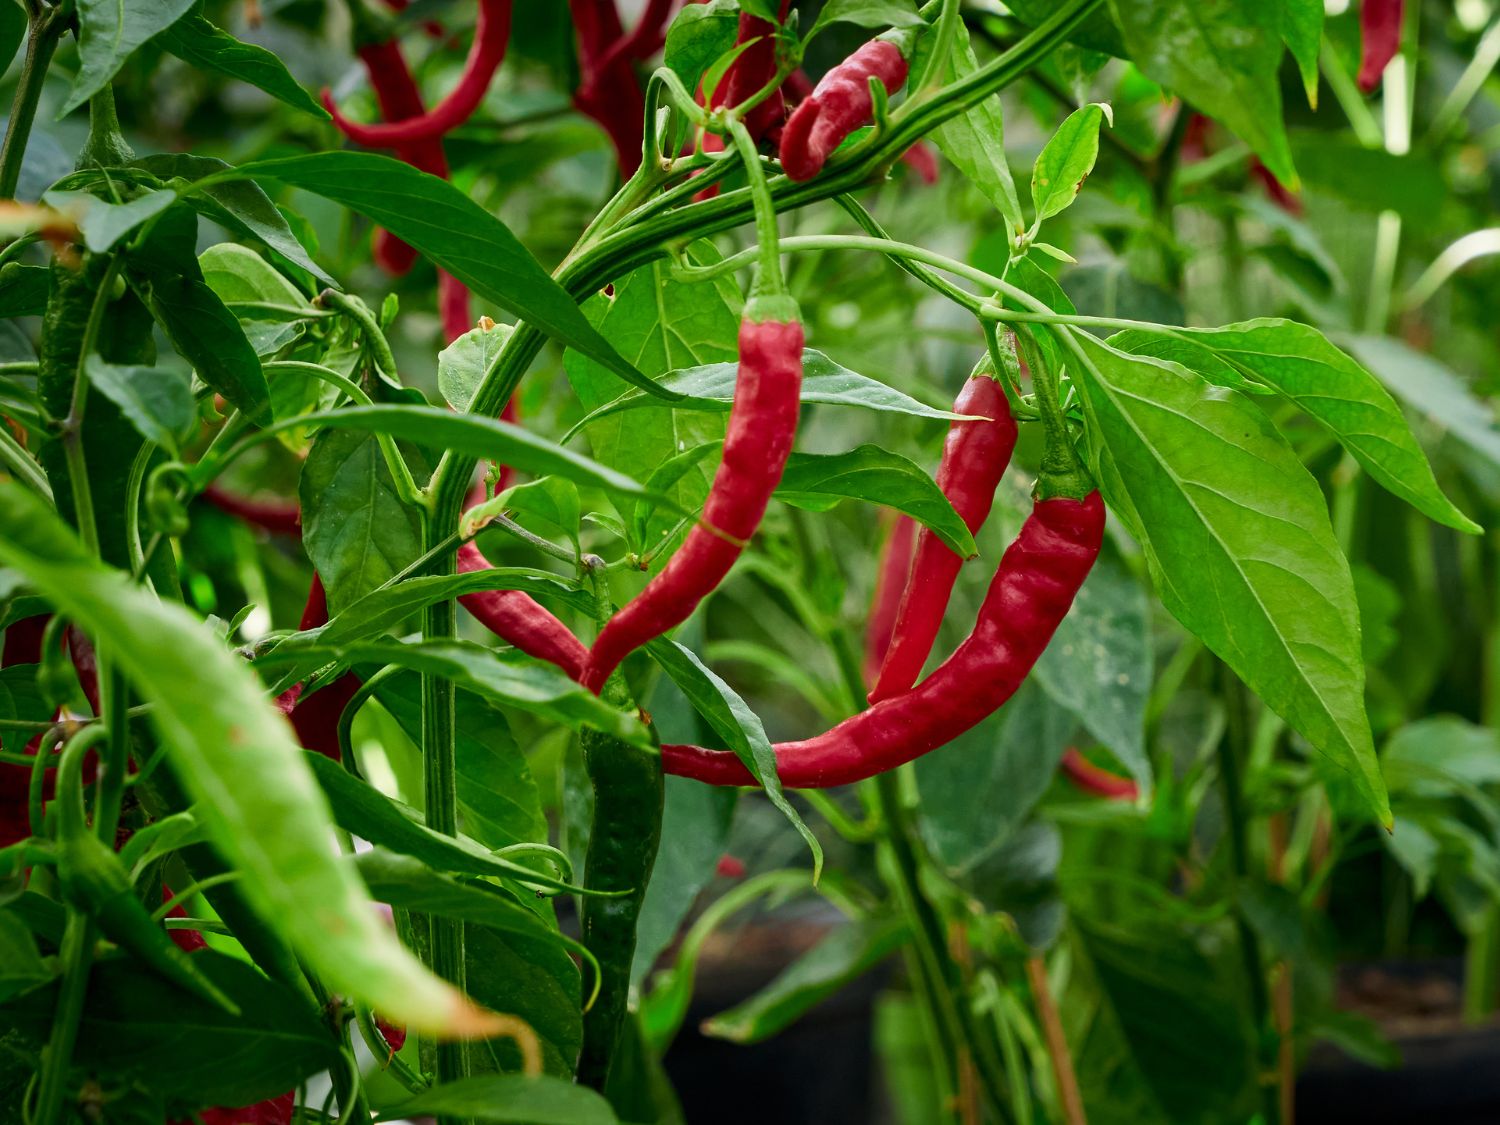 A close up view of cayenne peppers growing in a garden